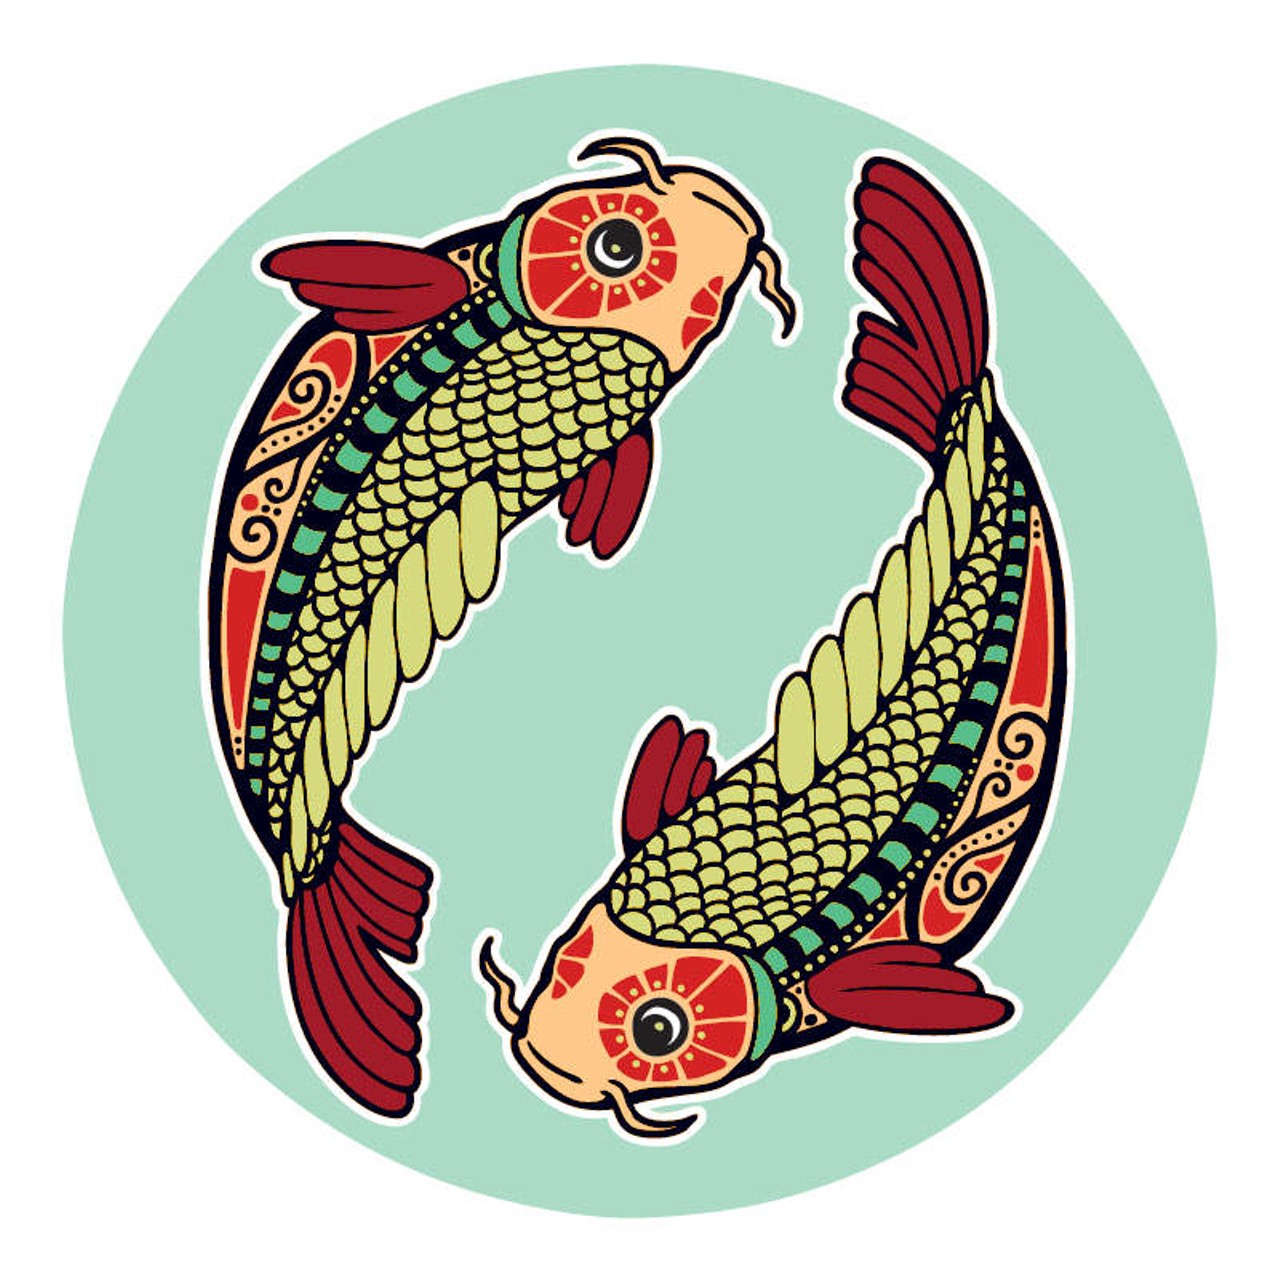 PISCES (Feb. 21-March 20):
Your situation is always complex. This has something to do with the fact that so many people rely upon you to be the glue that holds everything together. You understand and accept this, but you're at a point where you're totally drained. In the midst of this, the deeper part of you has woken up to your truer calling. Whatever that happens to be has to be considered and balanced in with existing responsibilities. You have been so good, and have held space for so many others, what has emerged from all of that is already forming the foundation for your heart's desire.